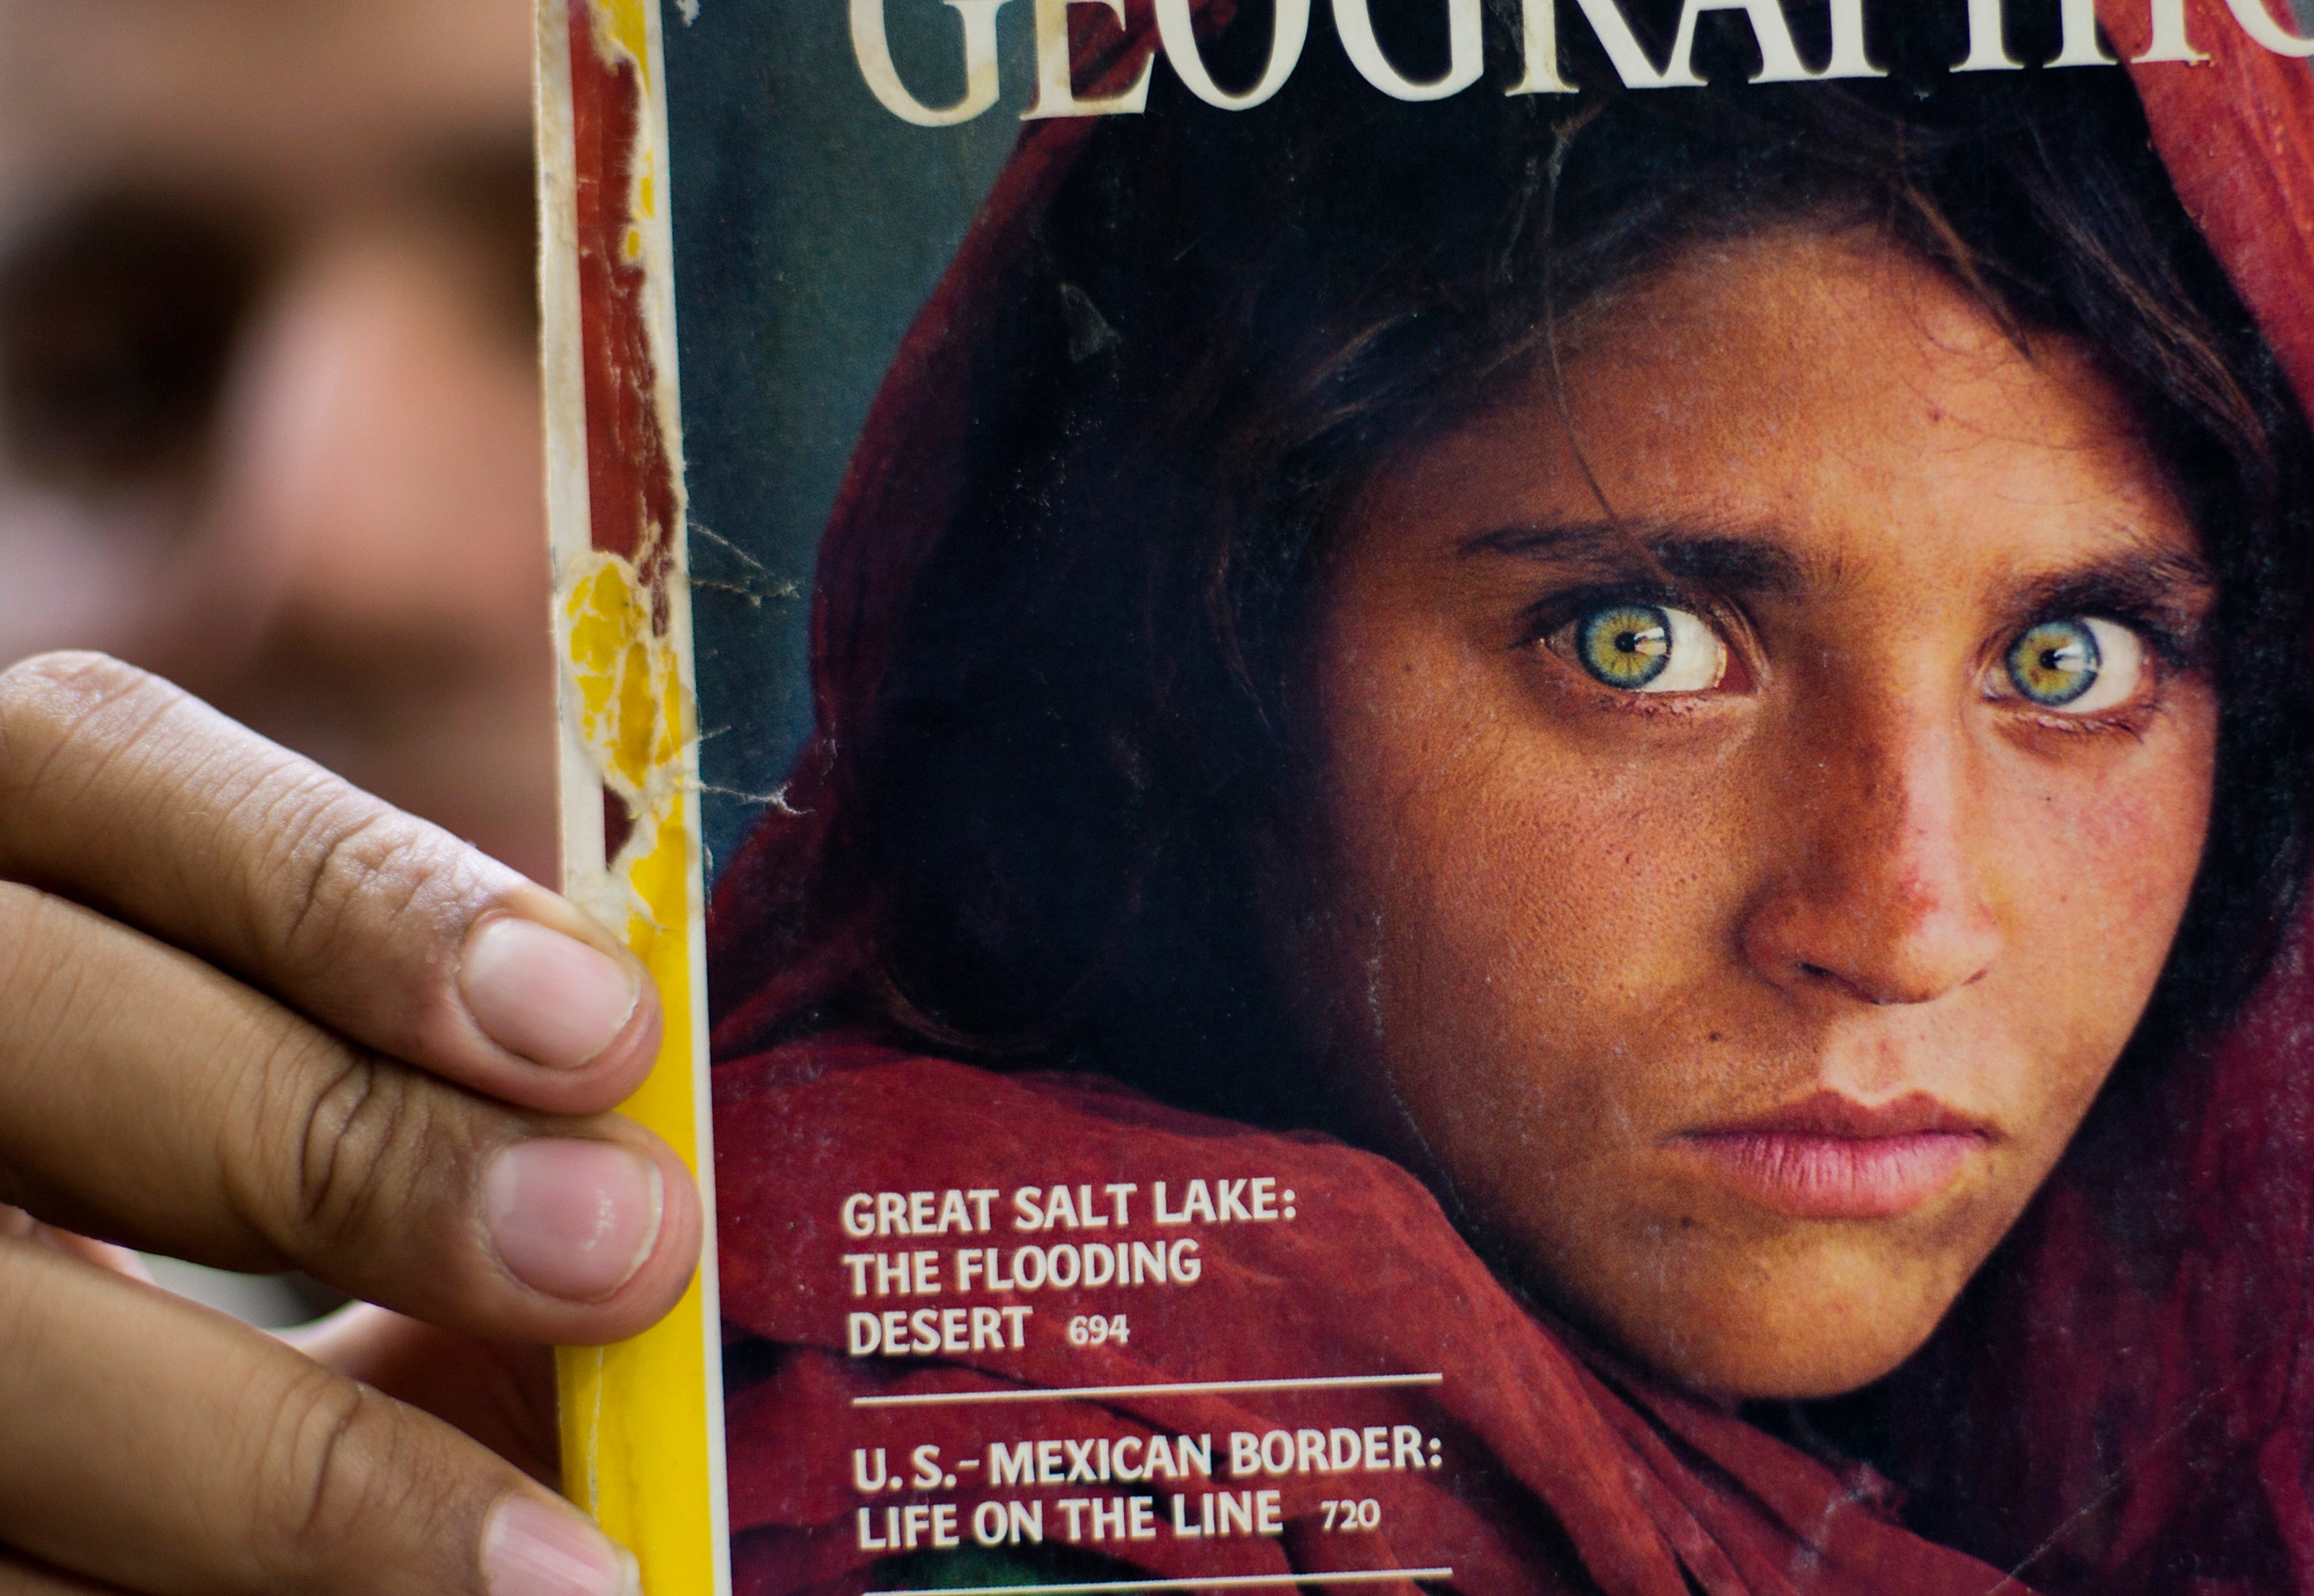 Sharbat Gula was photographed in 1984 for National Geographic magazine